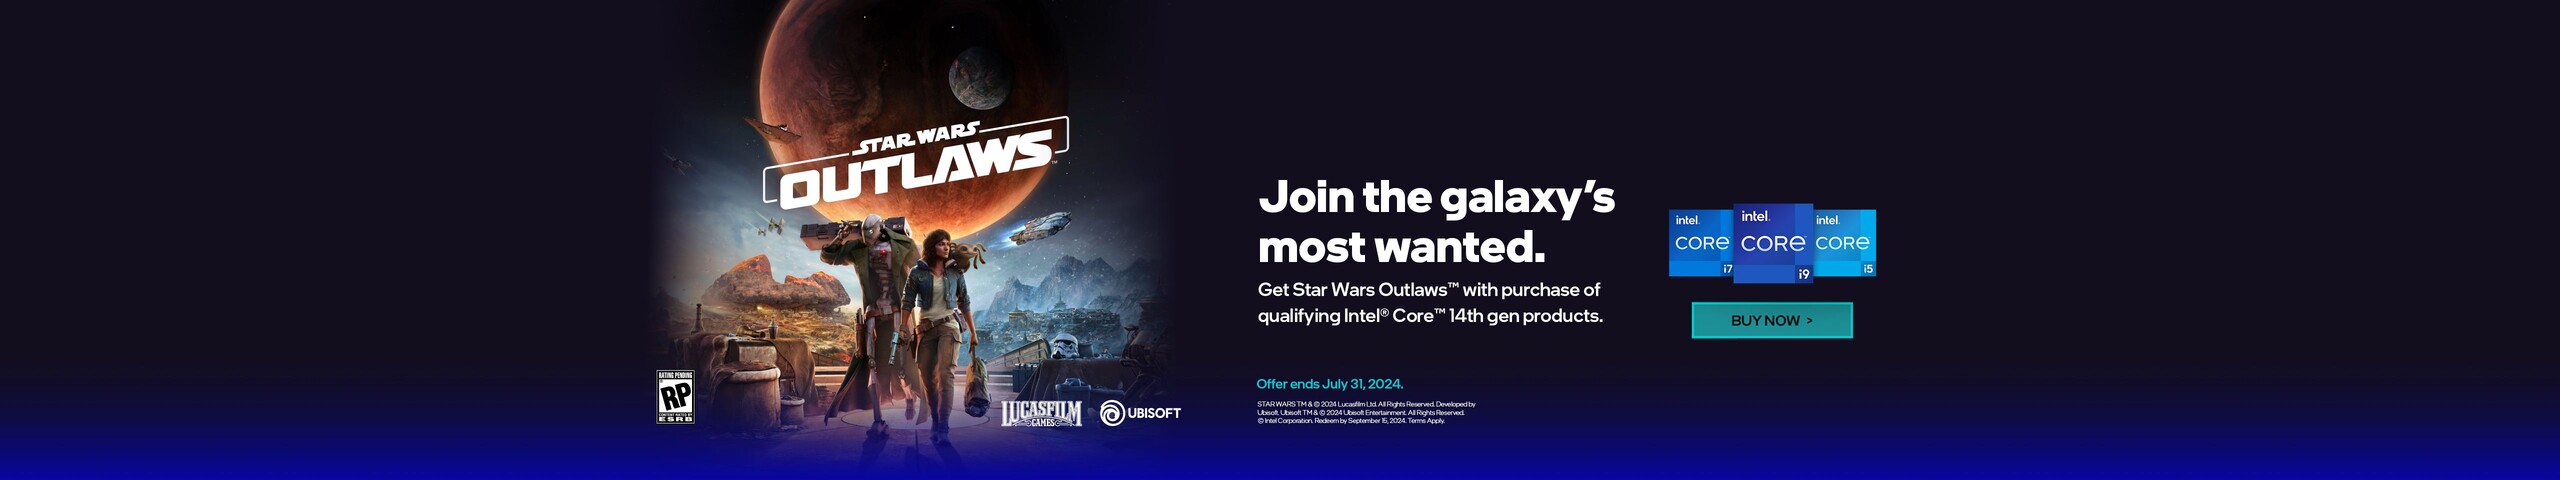 Star Wars Outlaws  Join the galaxy's most wanted.  Get Star Wars Outlaws with purchase of qualifing Intel Core 14th gen products.  Offer ends July 31, 2024  Buy Now